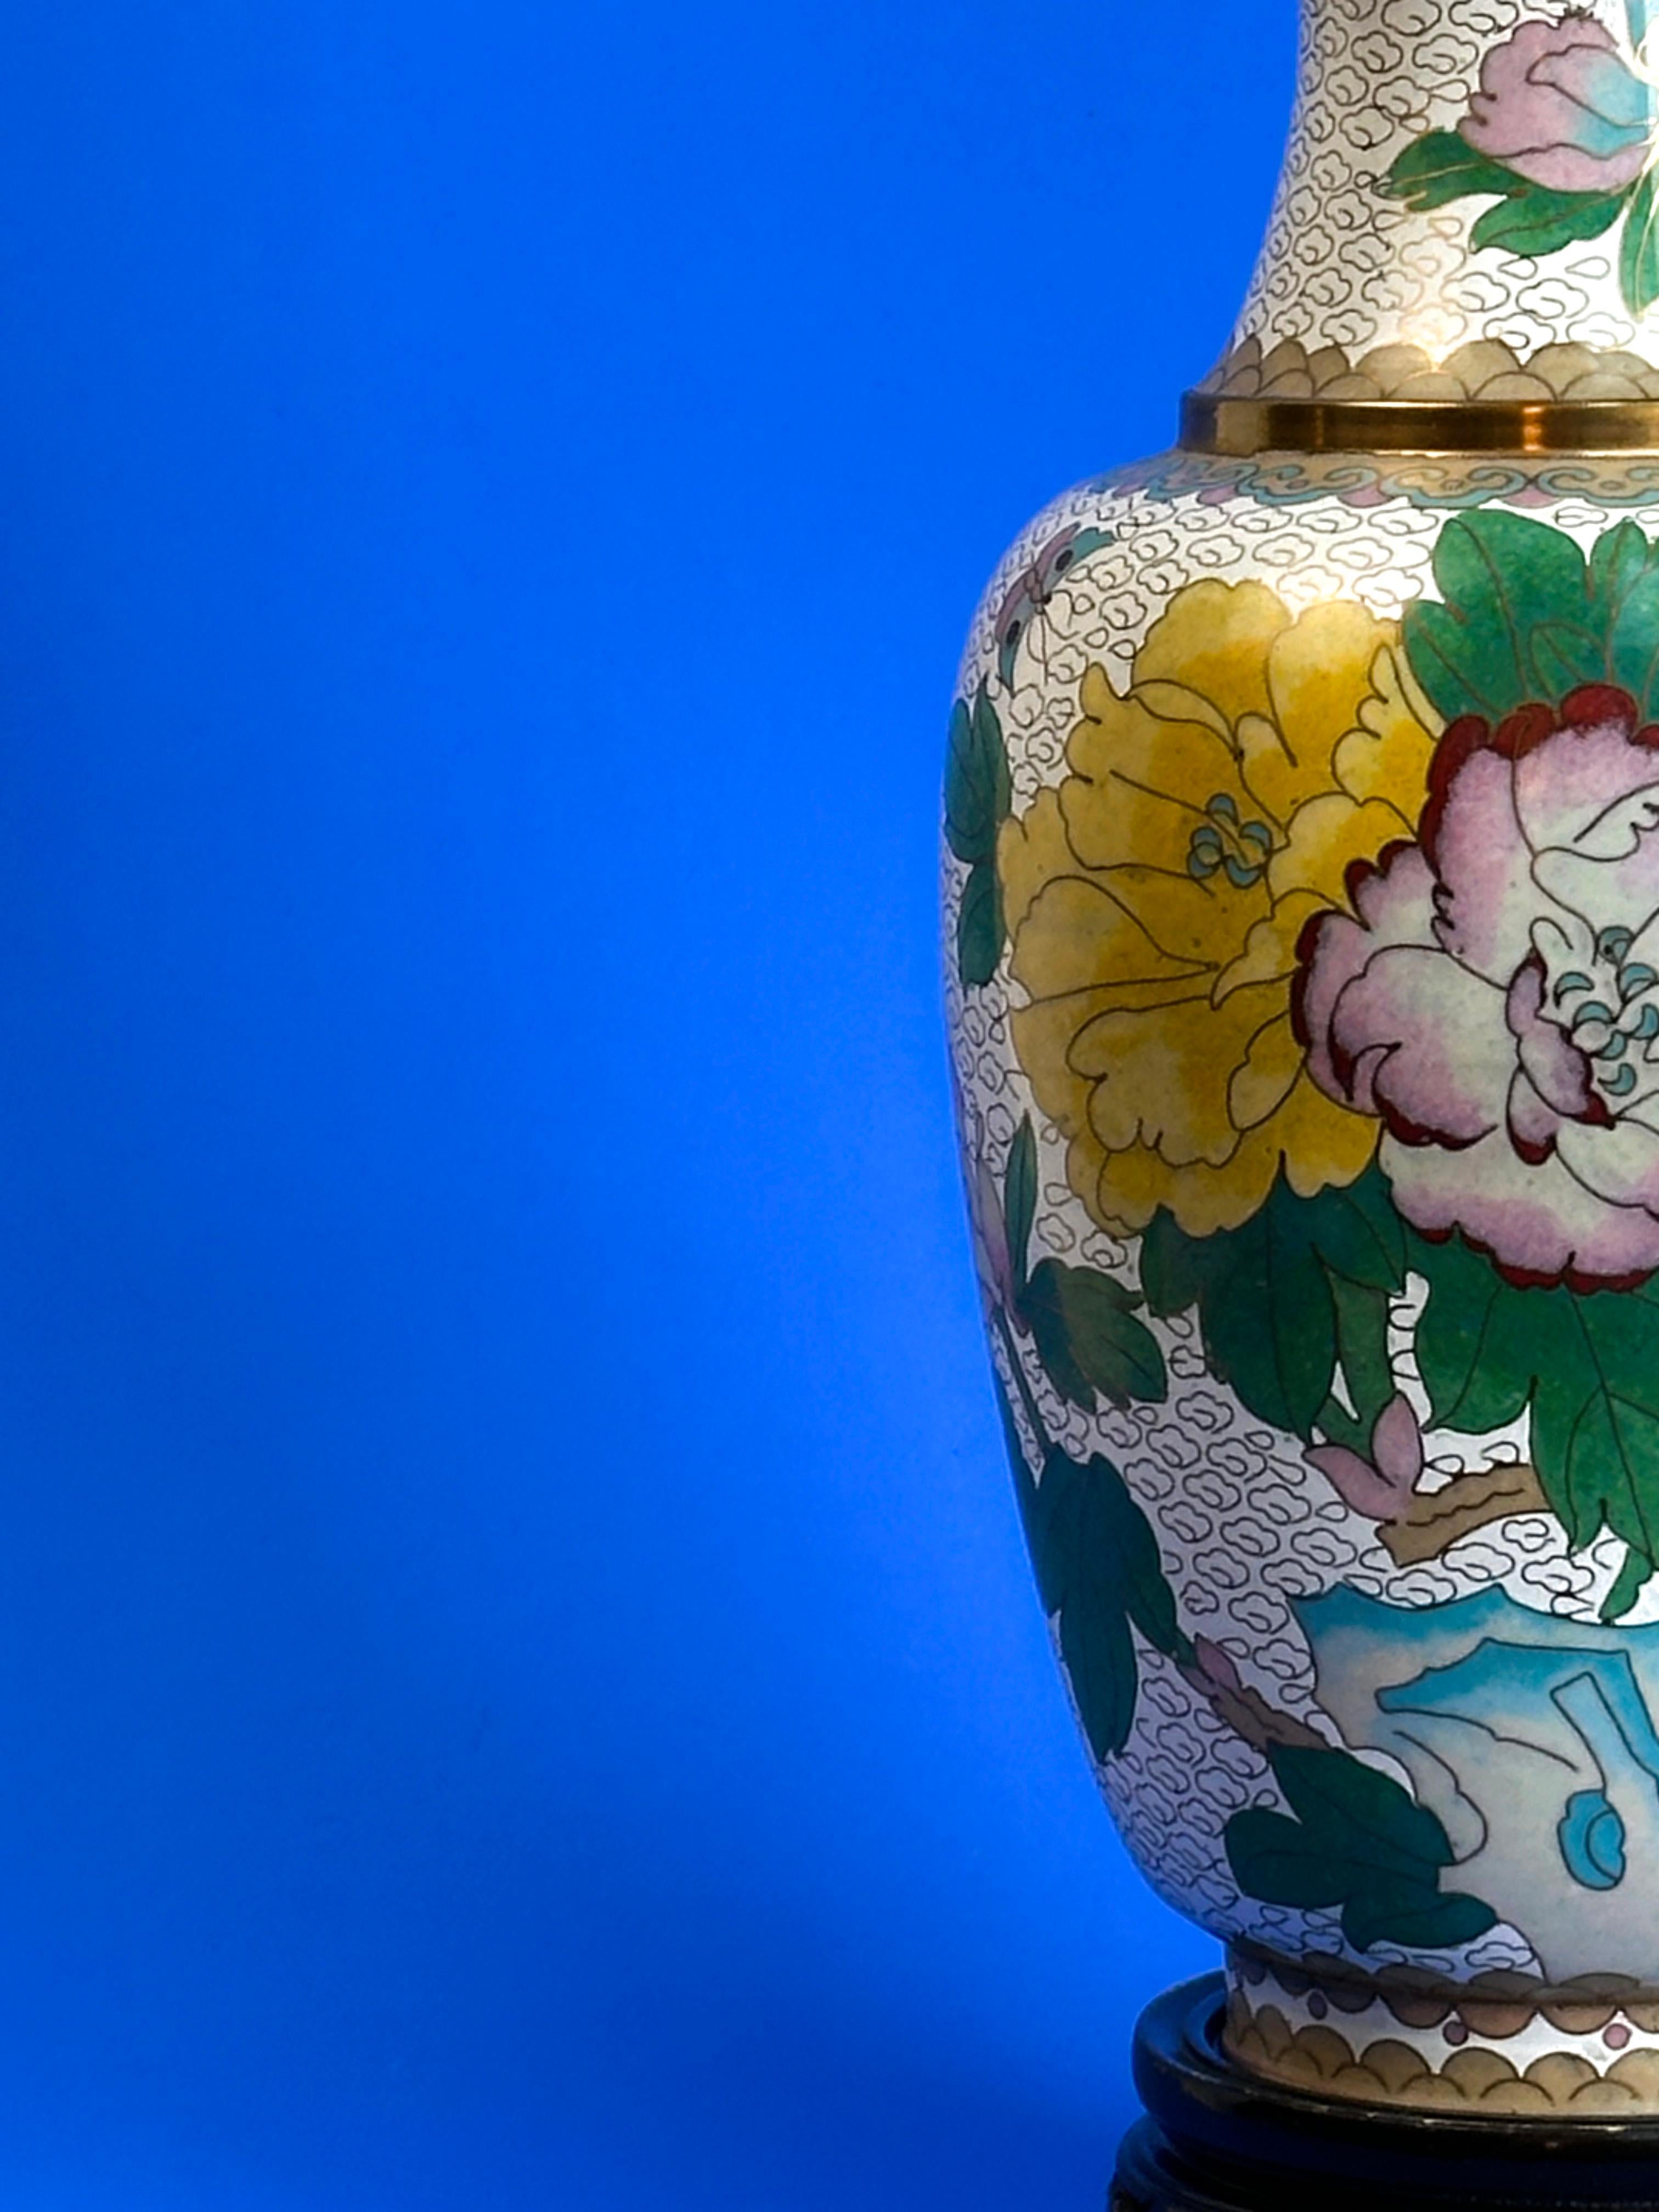 Vintage Chinese Cloisonné Vase

A brass-crafted, baluster-shaped cloisonné vase featuring vibrant floral and butterfly motifs on a crisp white enamel background, complete with a hand-carved wooden plinth.

Key Points:

Brass base with detailed brass